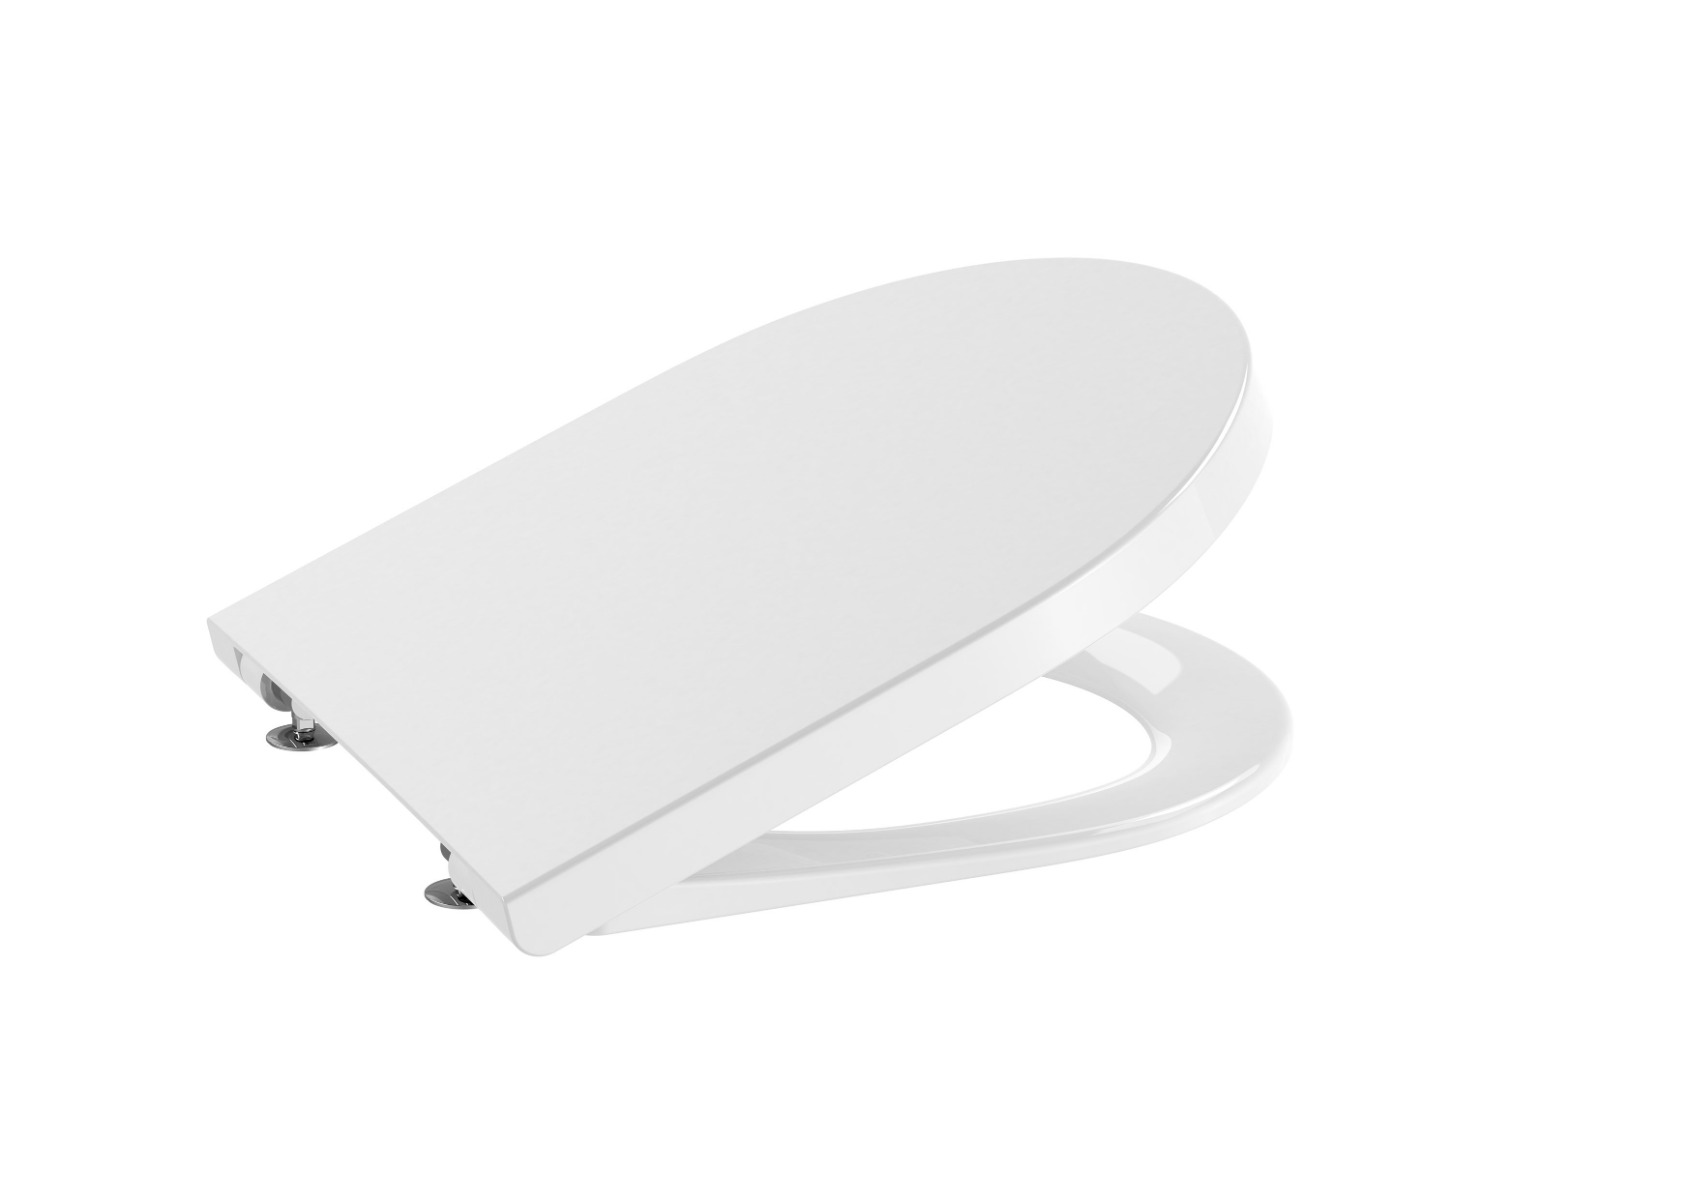 Soft-closing SUPRALIT toilet seat and cover A80152C00B